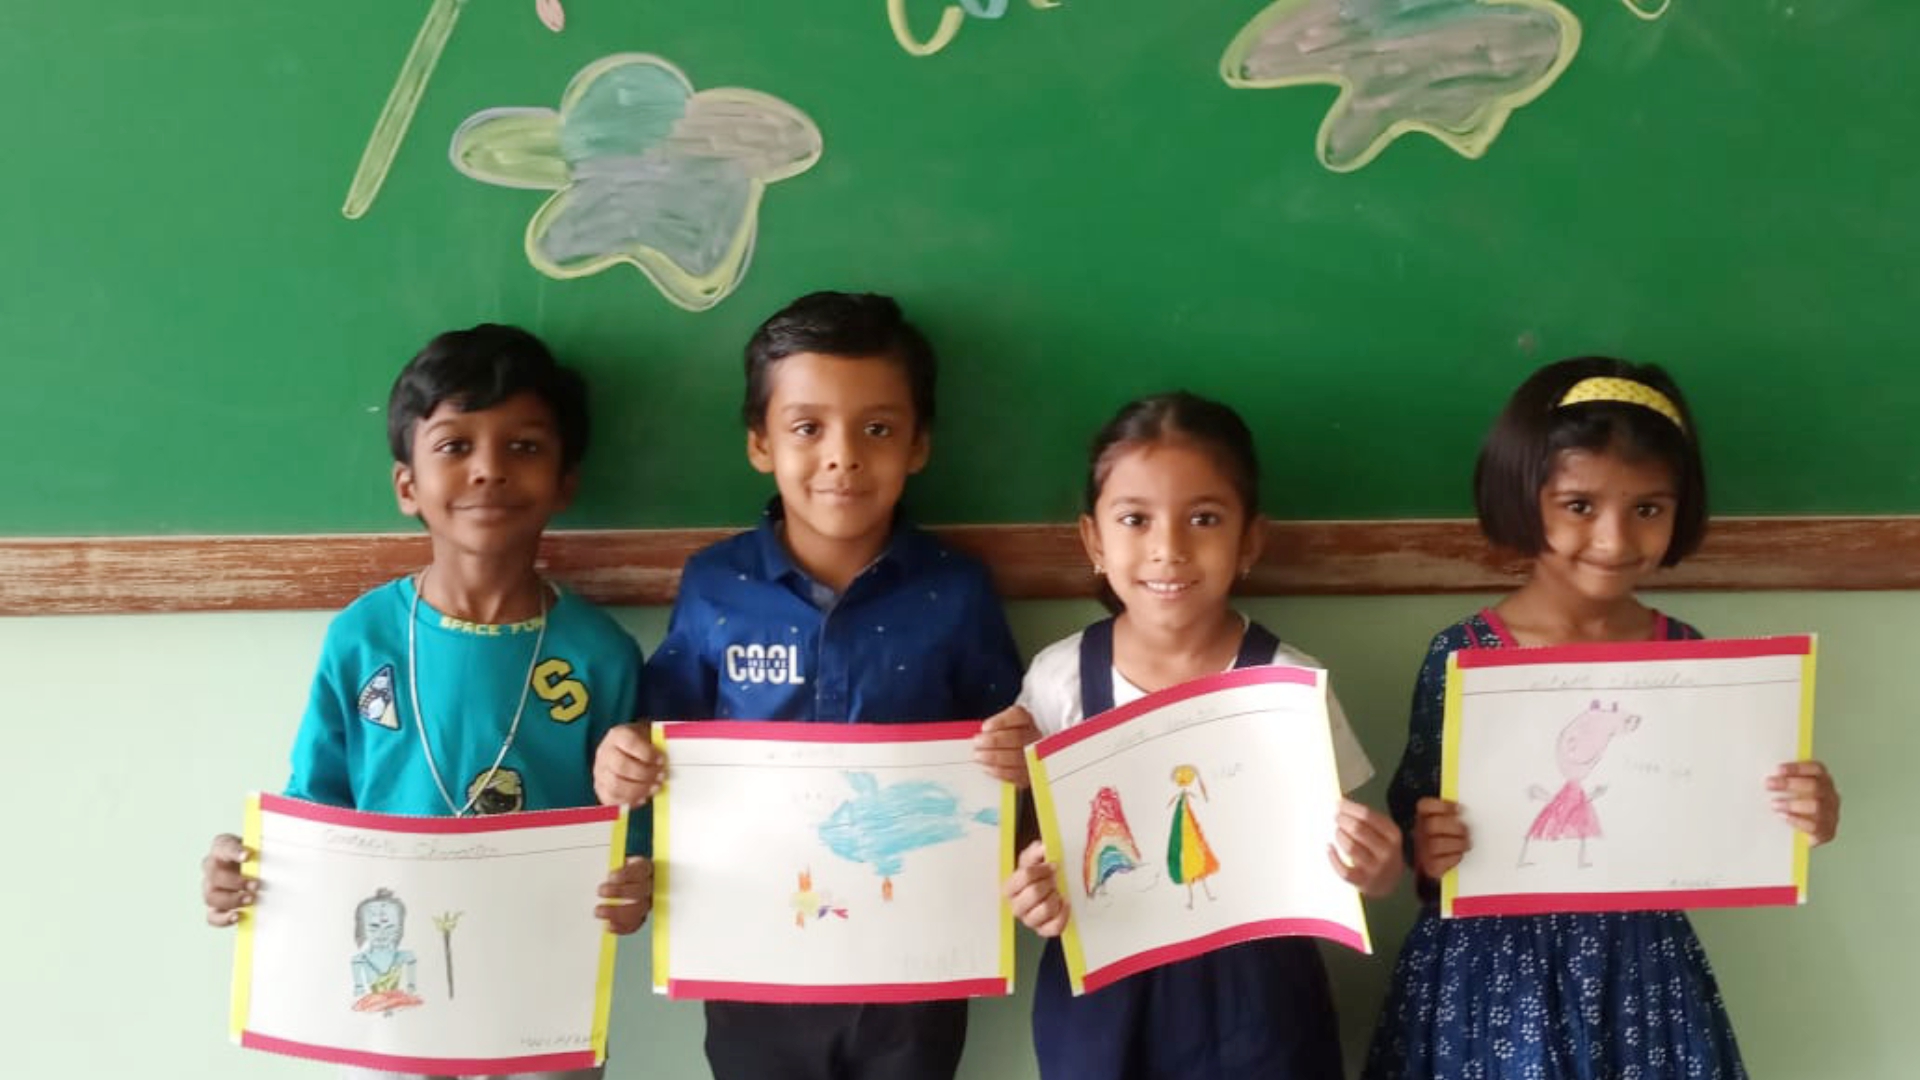 Fun with Colour Activity by LKG Students